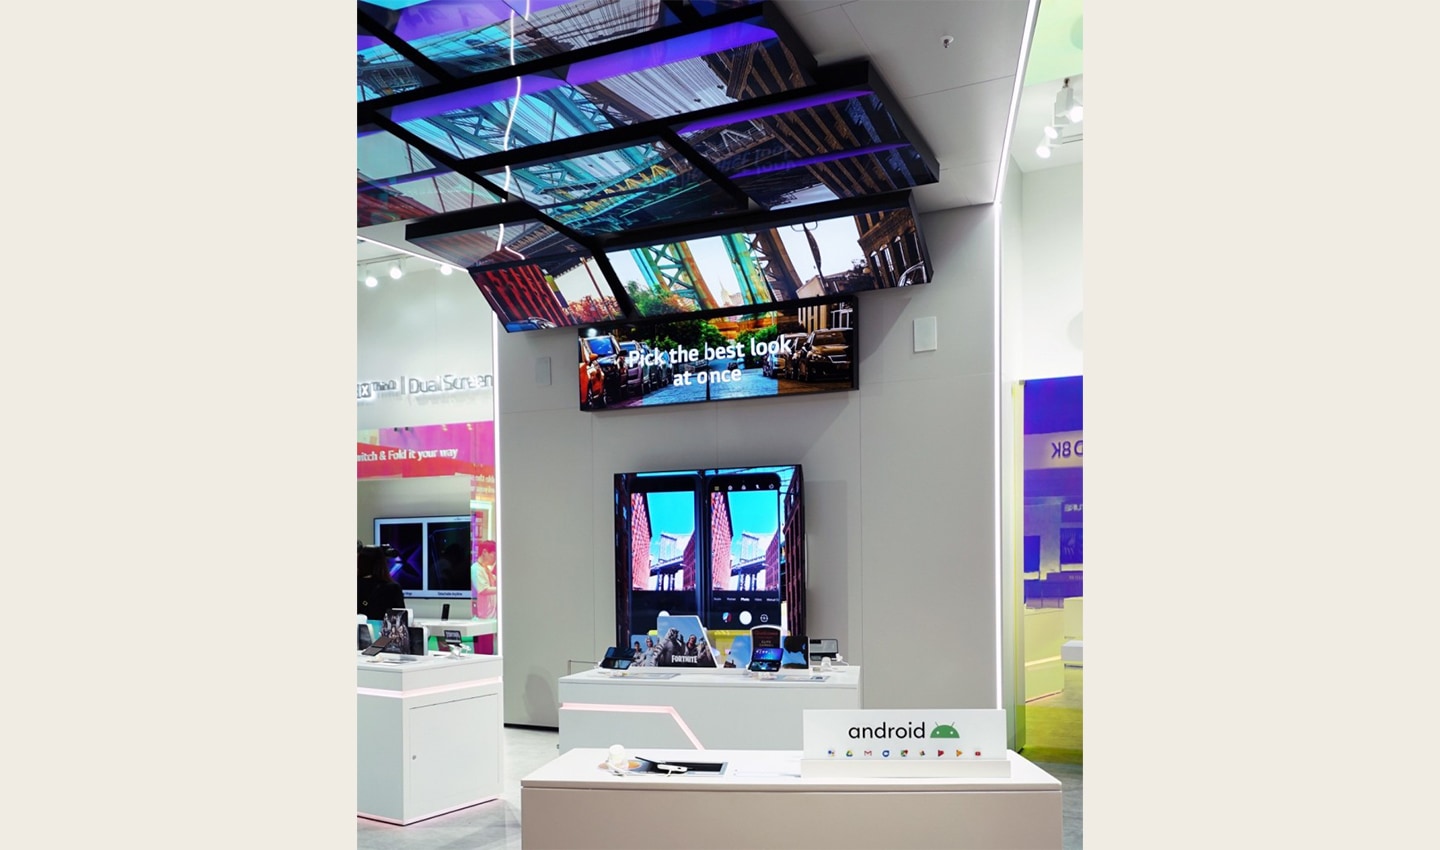 The LG G8X ThinQ zone is viewed from the other direction and the zone demonstrates the key features of LG G8X ThinQ using a number of large TV displays.